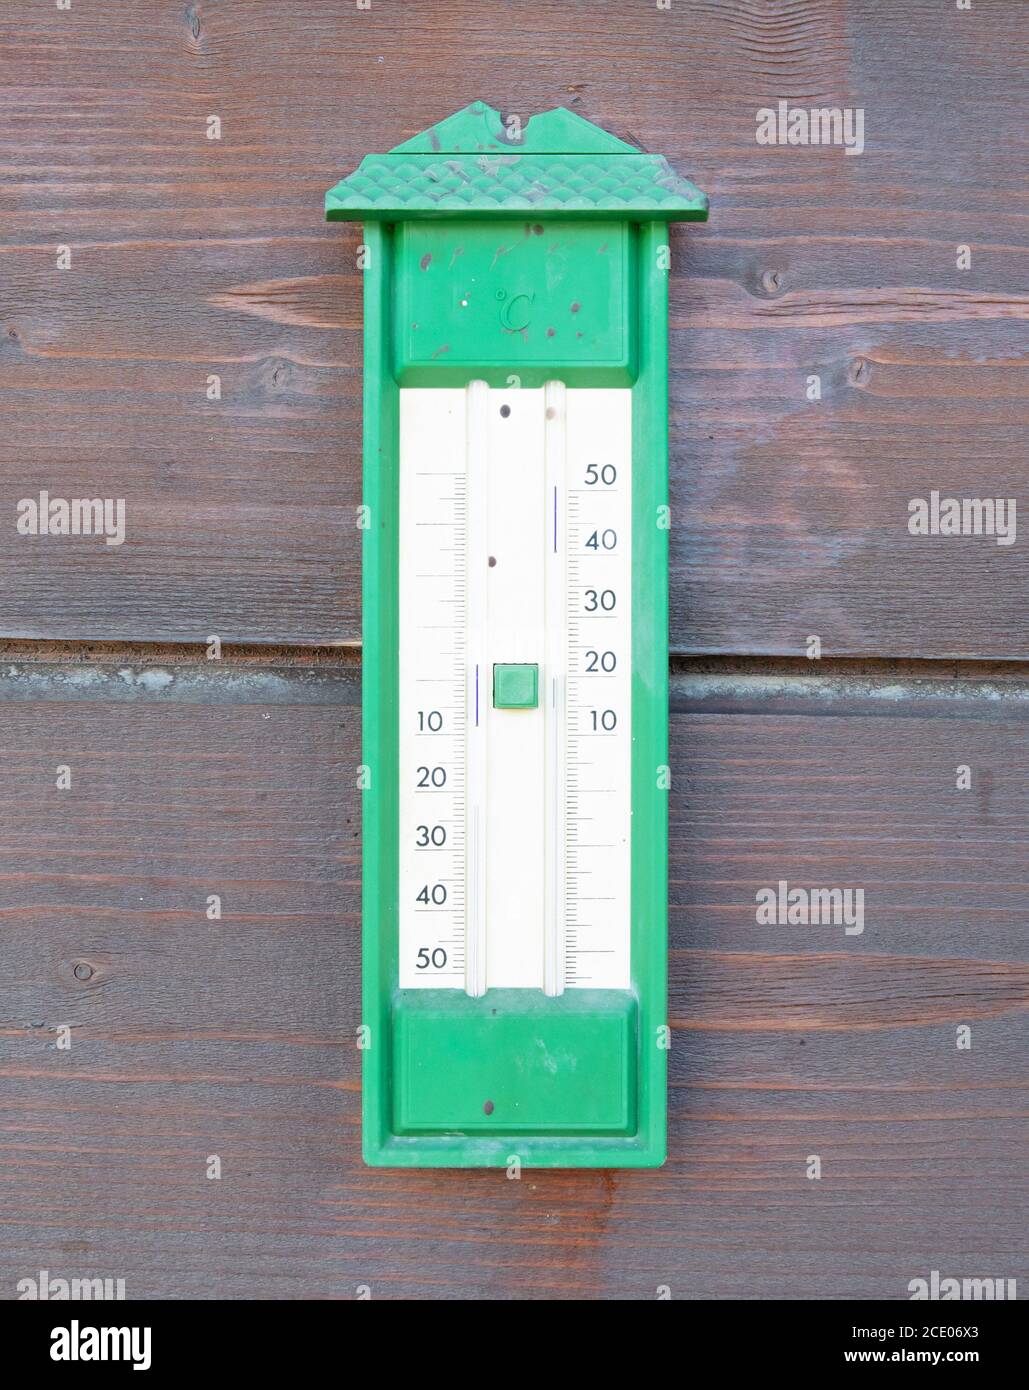 https://c8.alamy.com/comp/2CE06X3/imagine-showing-a-plastic-thermometer-used-to-see-outside-temperature-2CE06X3.jpg